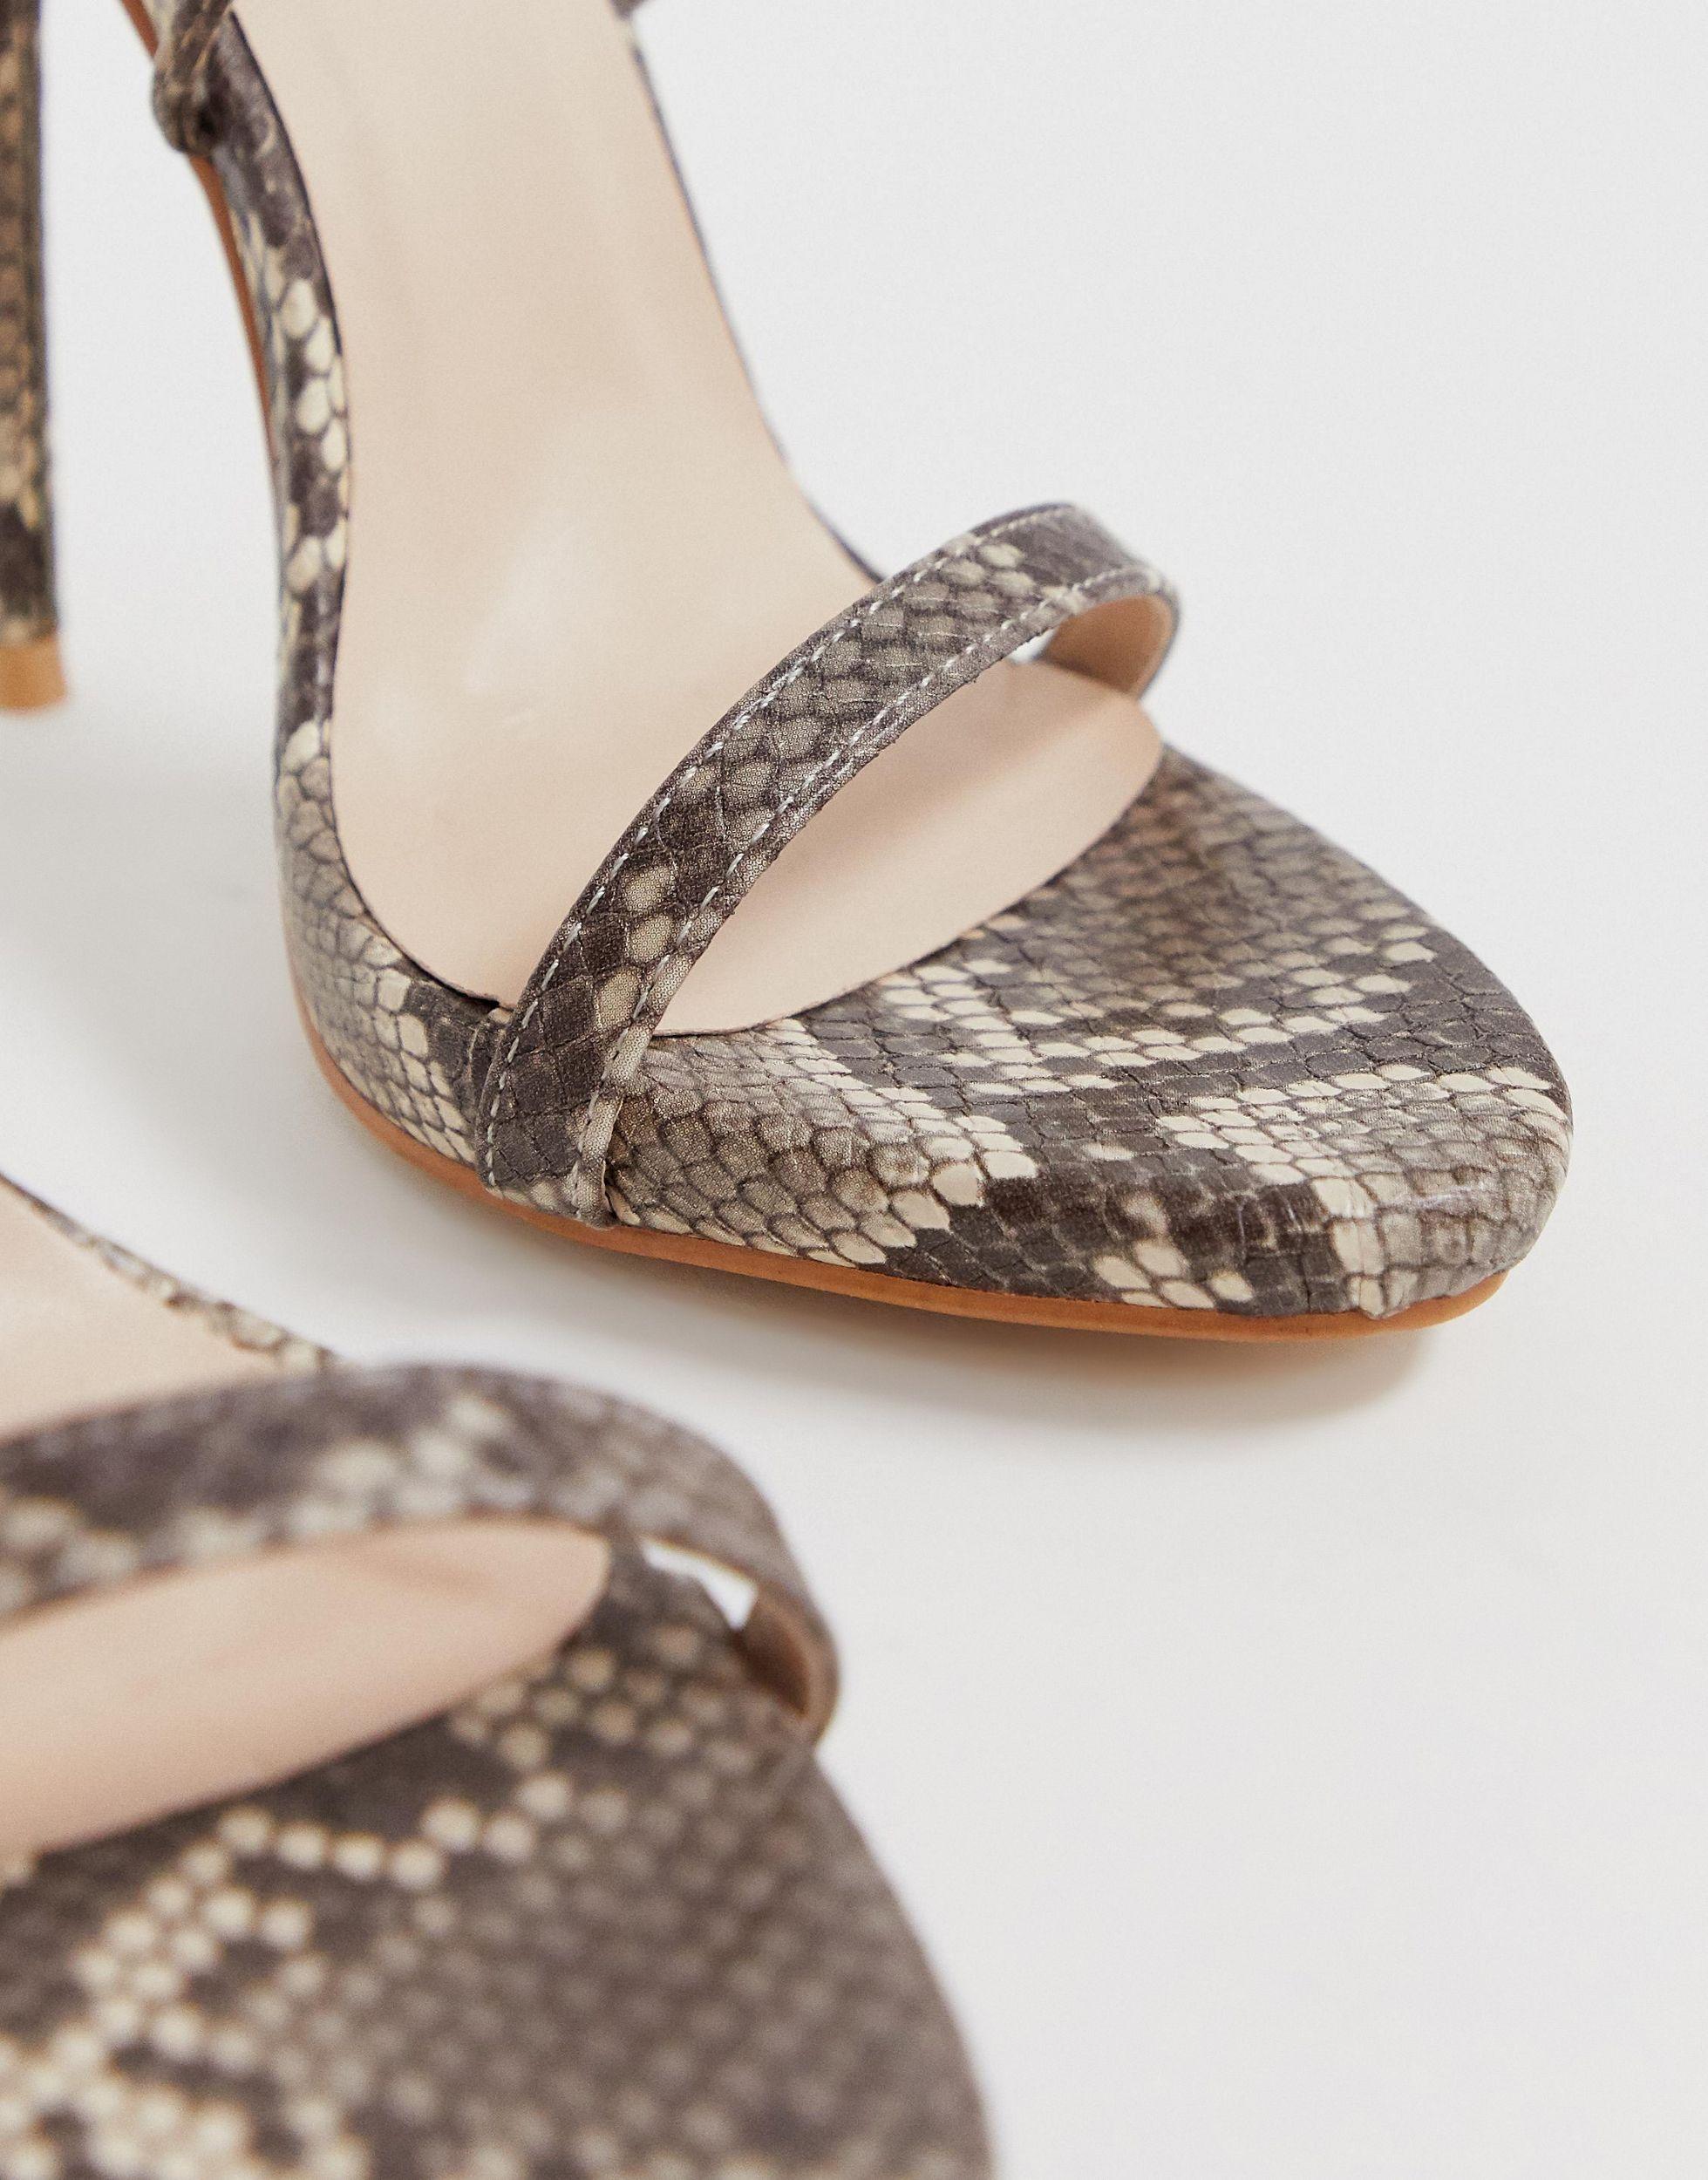 SIMMI Shoes Simmi London Shania Tie Up Snake Print Heeled Sandals in  Natural | Lyst